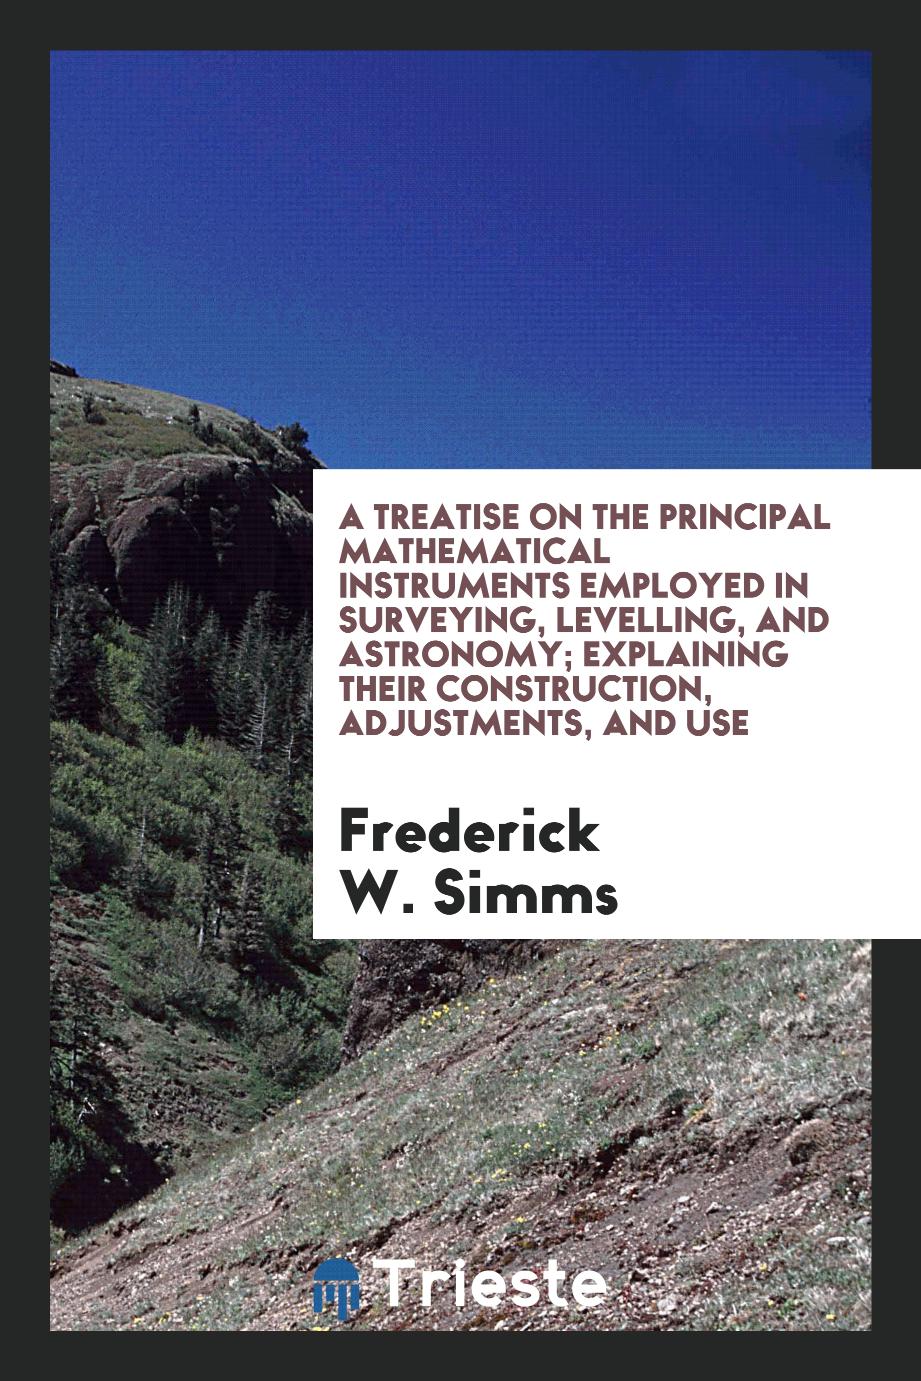 A Treatise on the Principal Mathematical Instruments Employed in Surveying, Levelling, and Astronomy; Explaining Their Construction, Adjustments, and Use